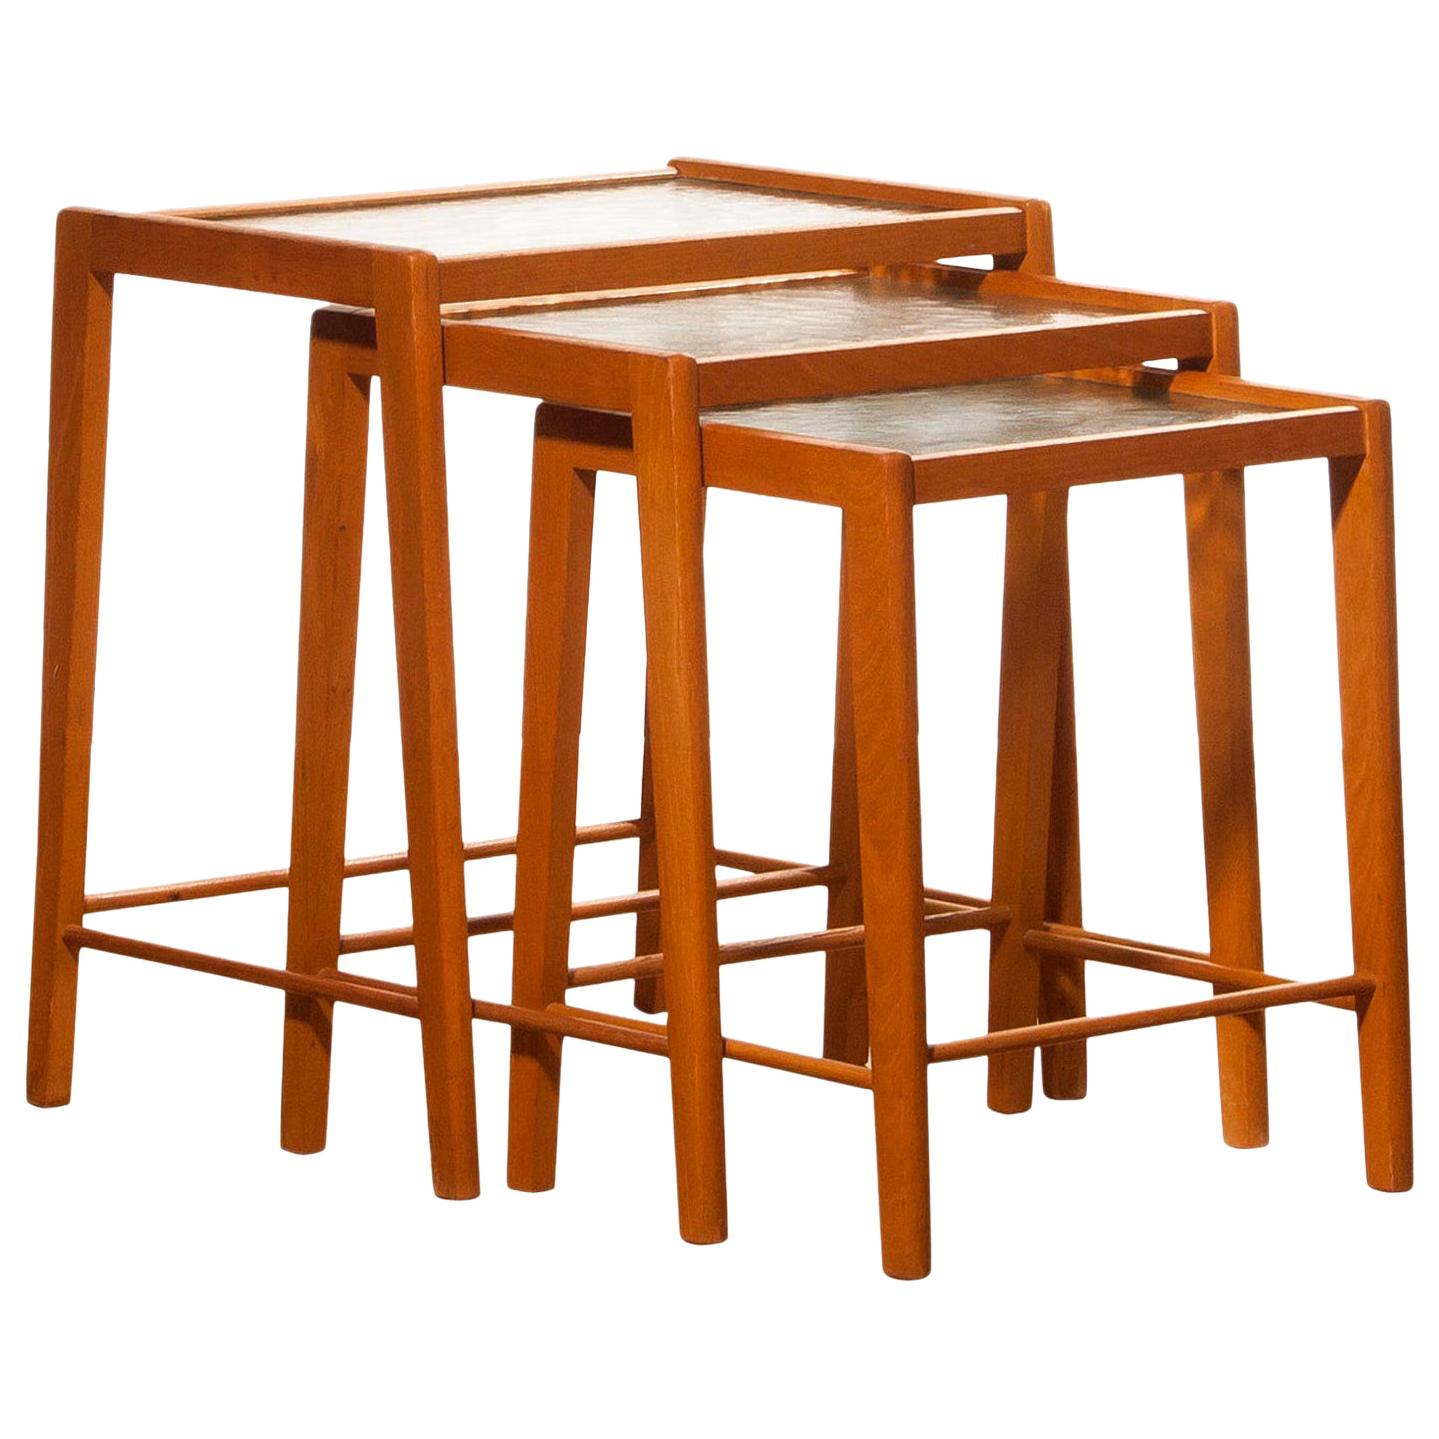 A lovely set of three nesting tables.
This beautiful set is made of oak with glass tops.
They are in very nice condition.
Period: 1960s.
Dimensions: H 50 cm, W 46 cm, D 31 cm
H 46 cm, W 41 cm, D 29 cm
H 42 cm, W 36 cm, D 27 cm.

  